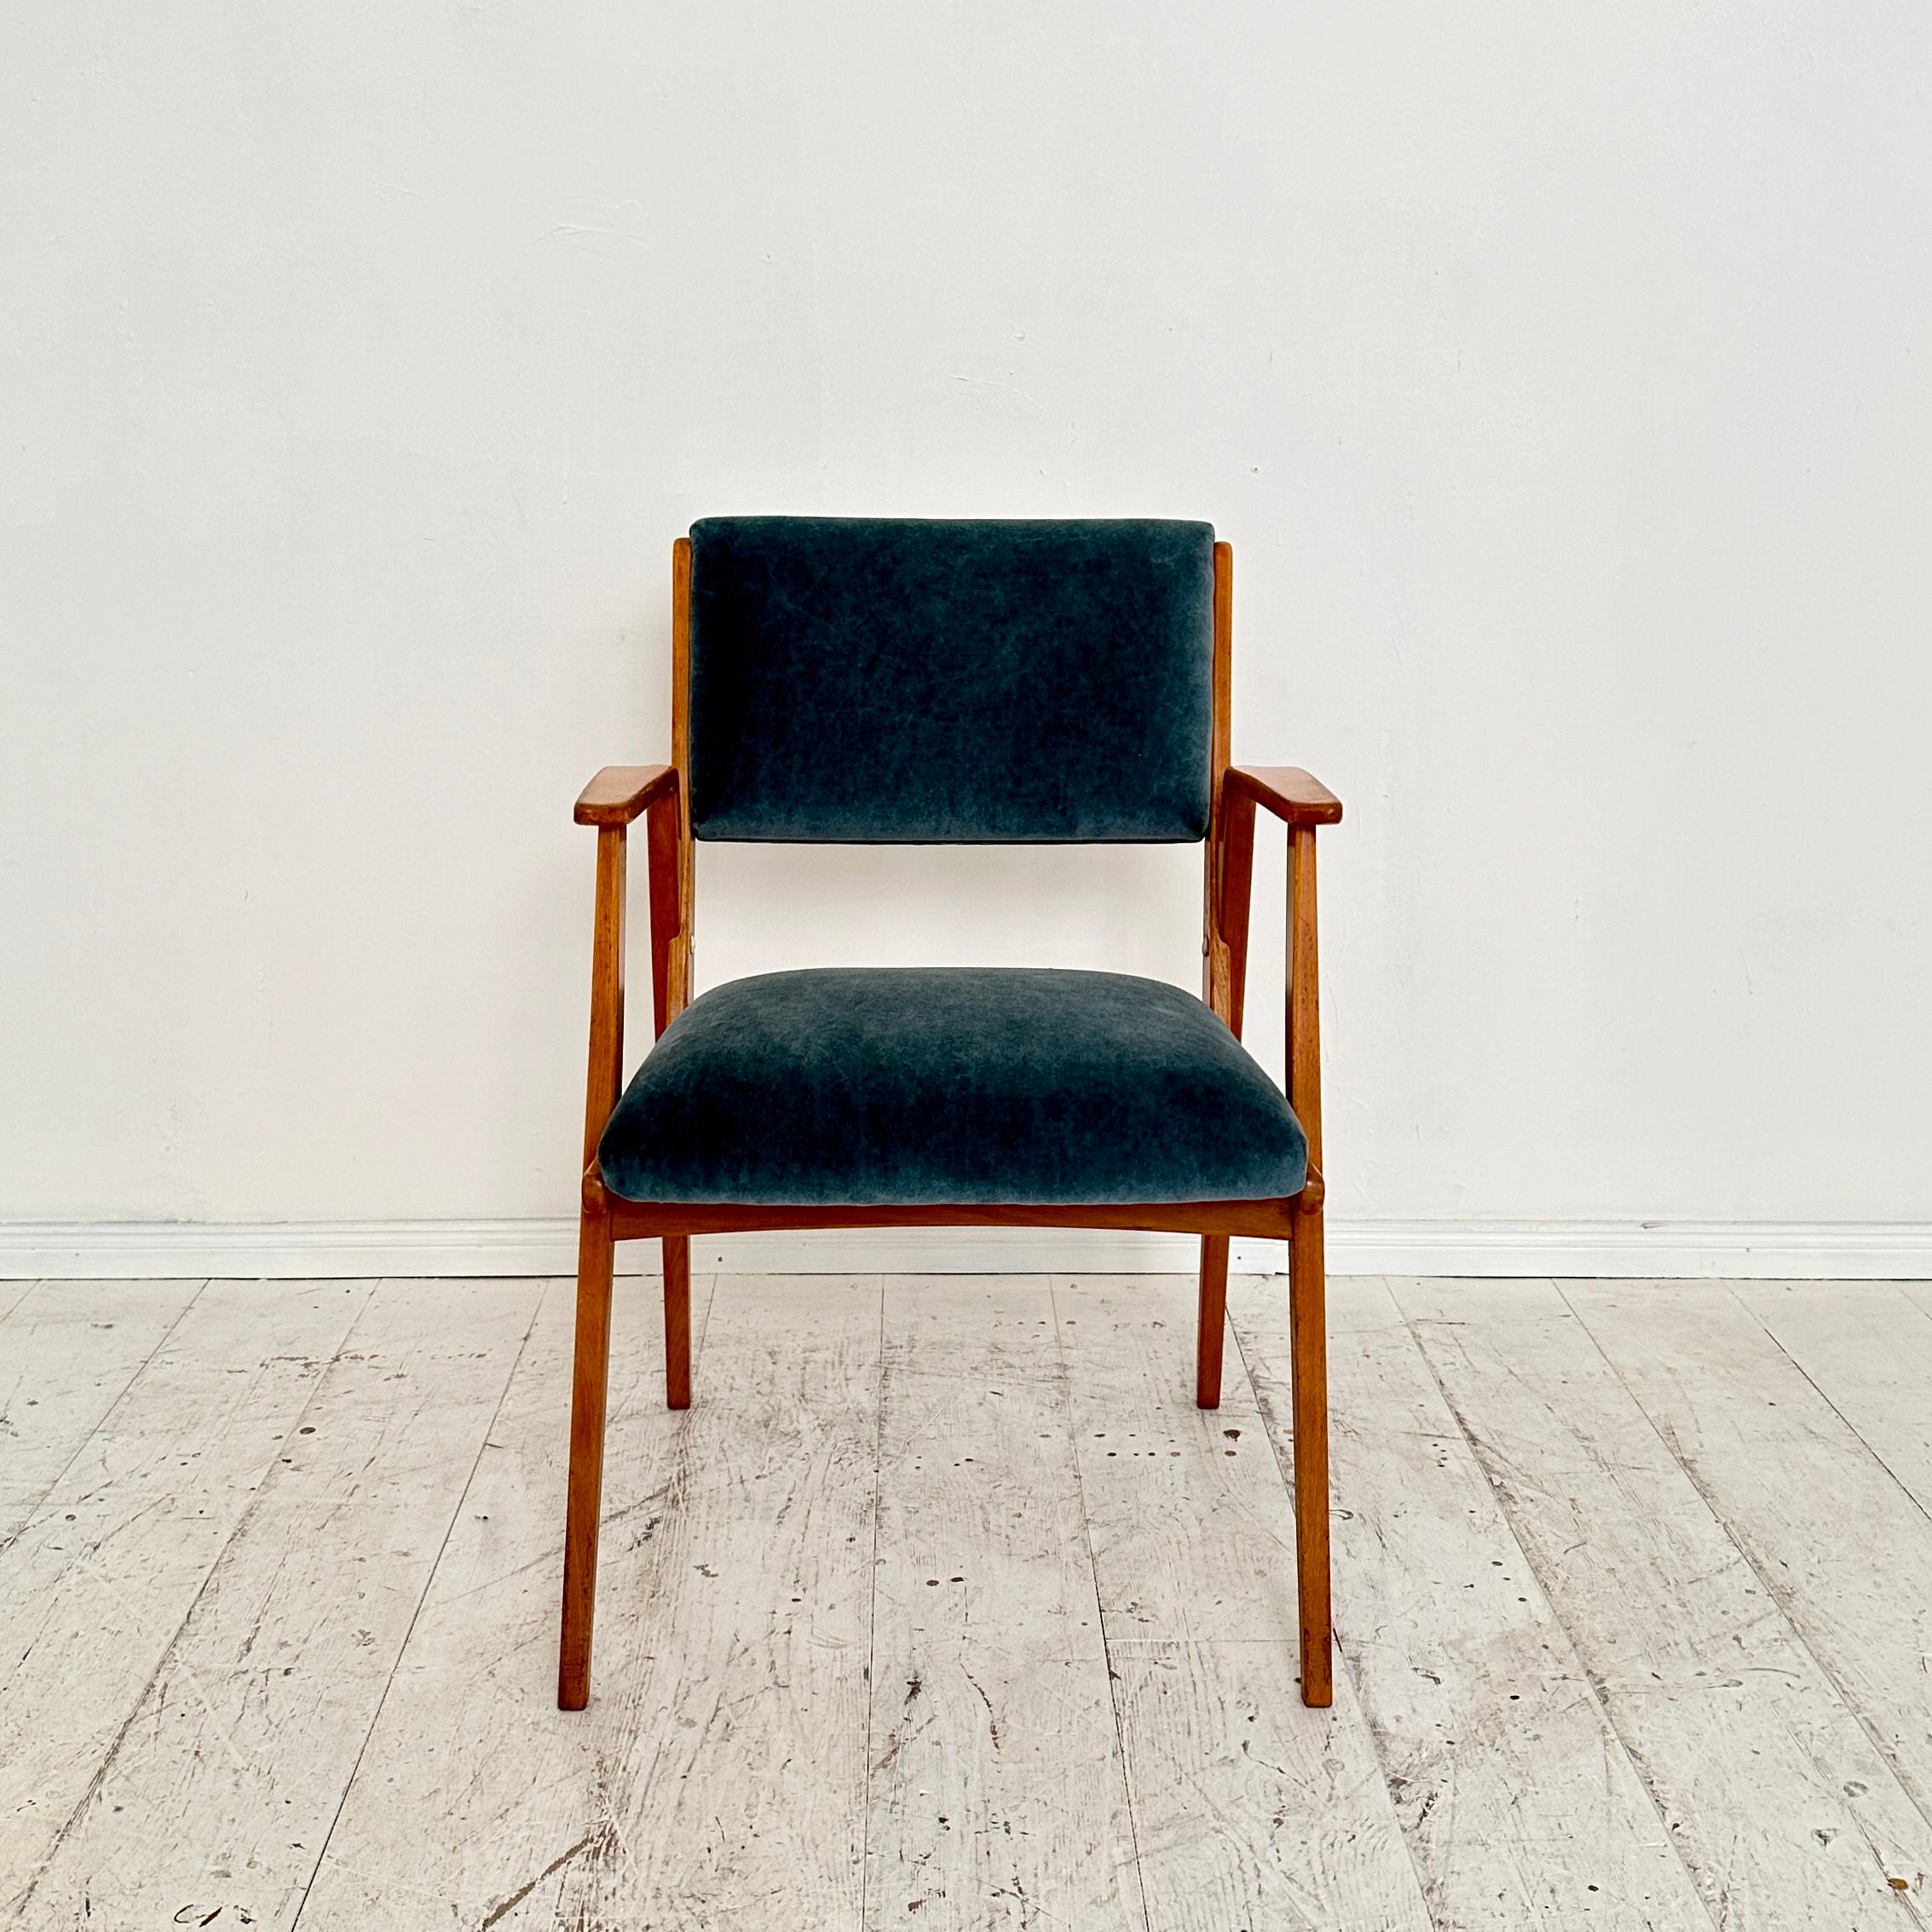 This mid-century German armchair, crafted circa 1950, is a timeless embodiment of elegant design and enduring comfort. 
The chair features a sturdy beech wood frame, showcasing the impeccable craftsmanship characteristic of the mid-century era. Its